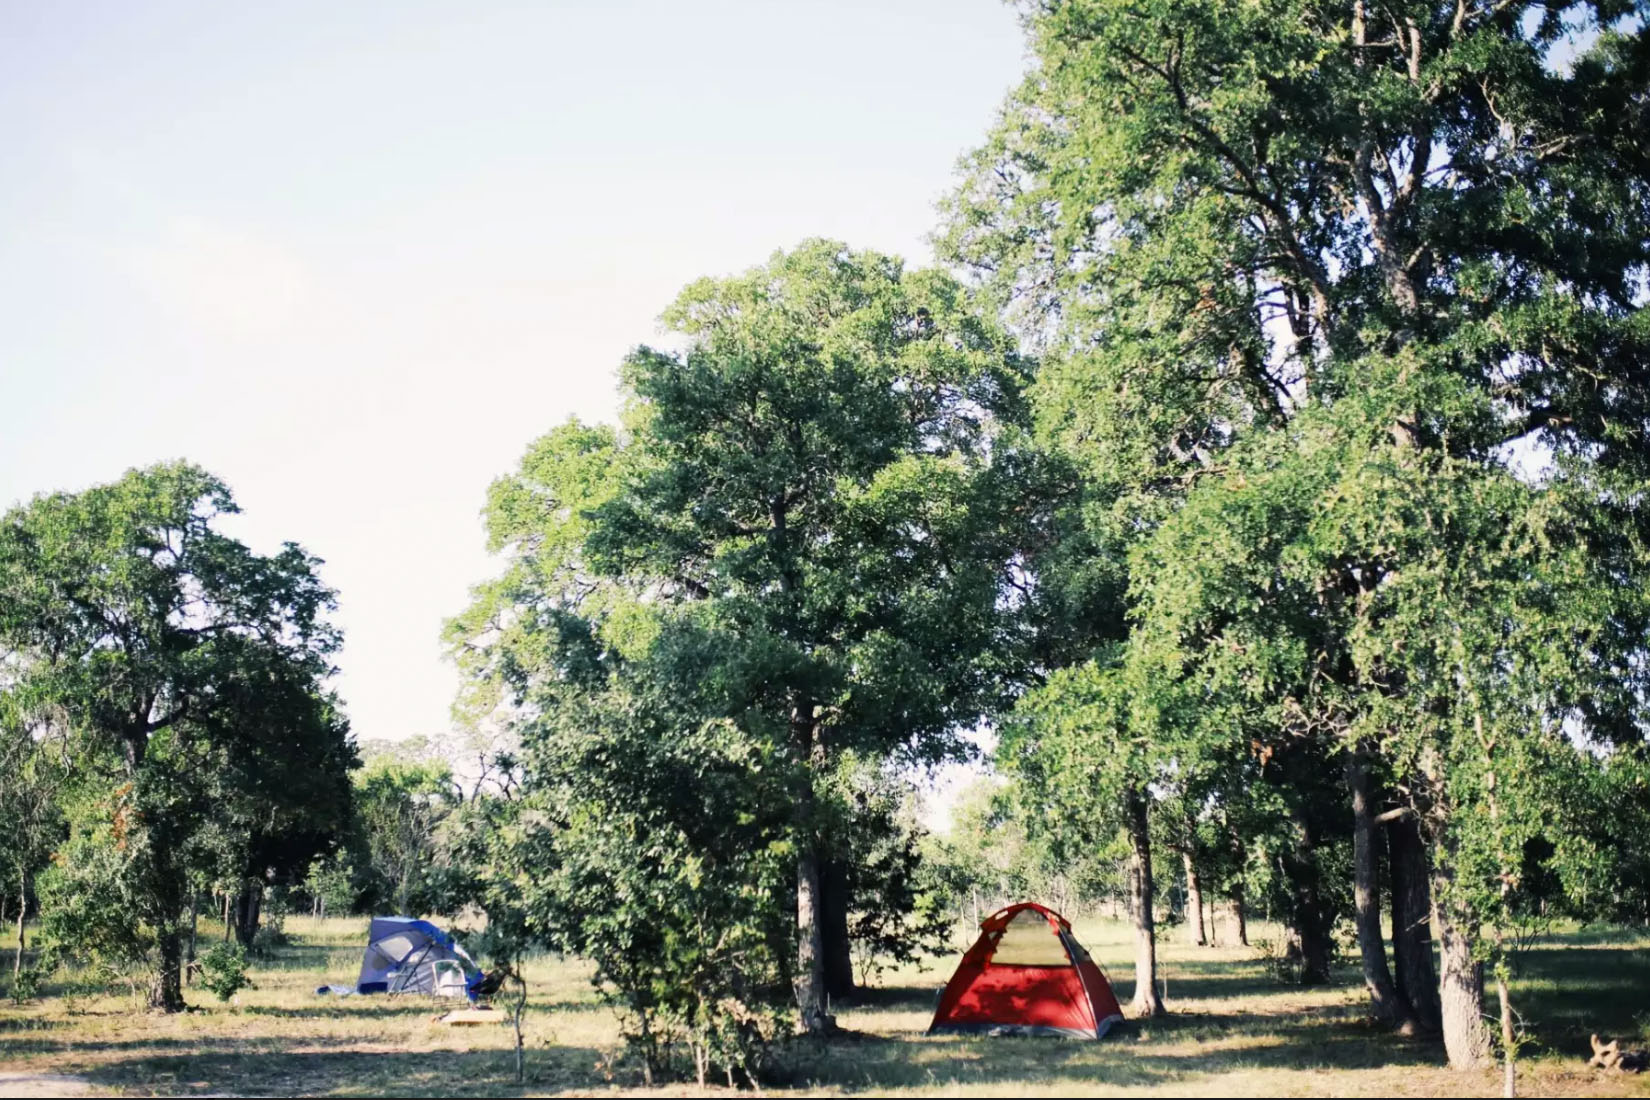 Al Hideaway kínál olcsó kemping Texasban $25's Hideaway offers low-cost camping in Texas for $25